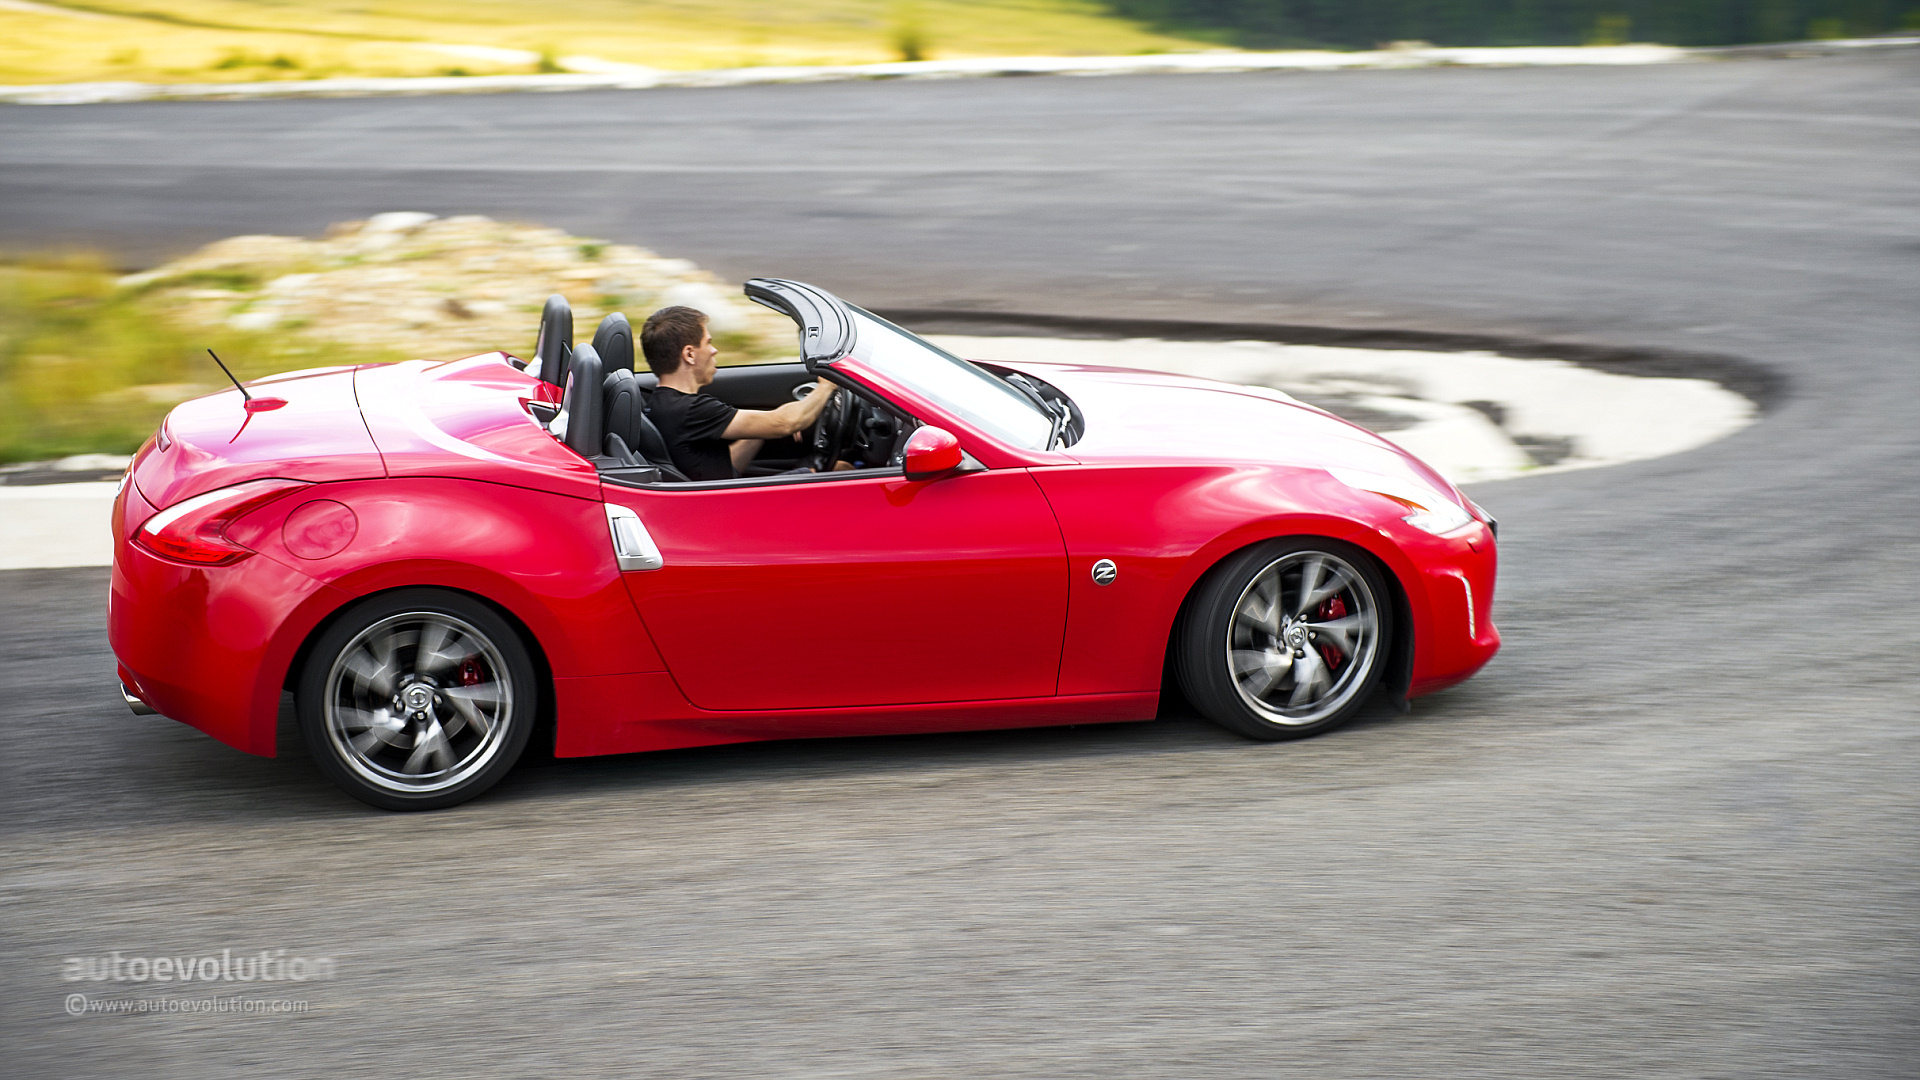 Nissan z roadster review #4